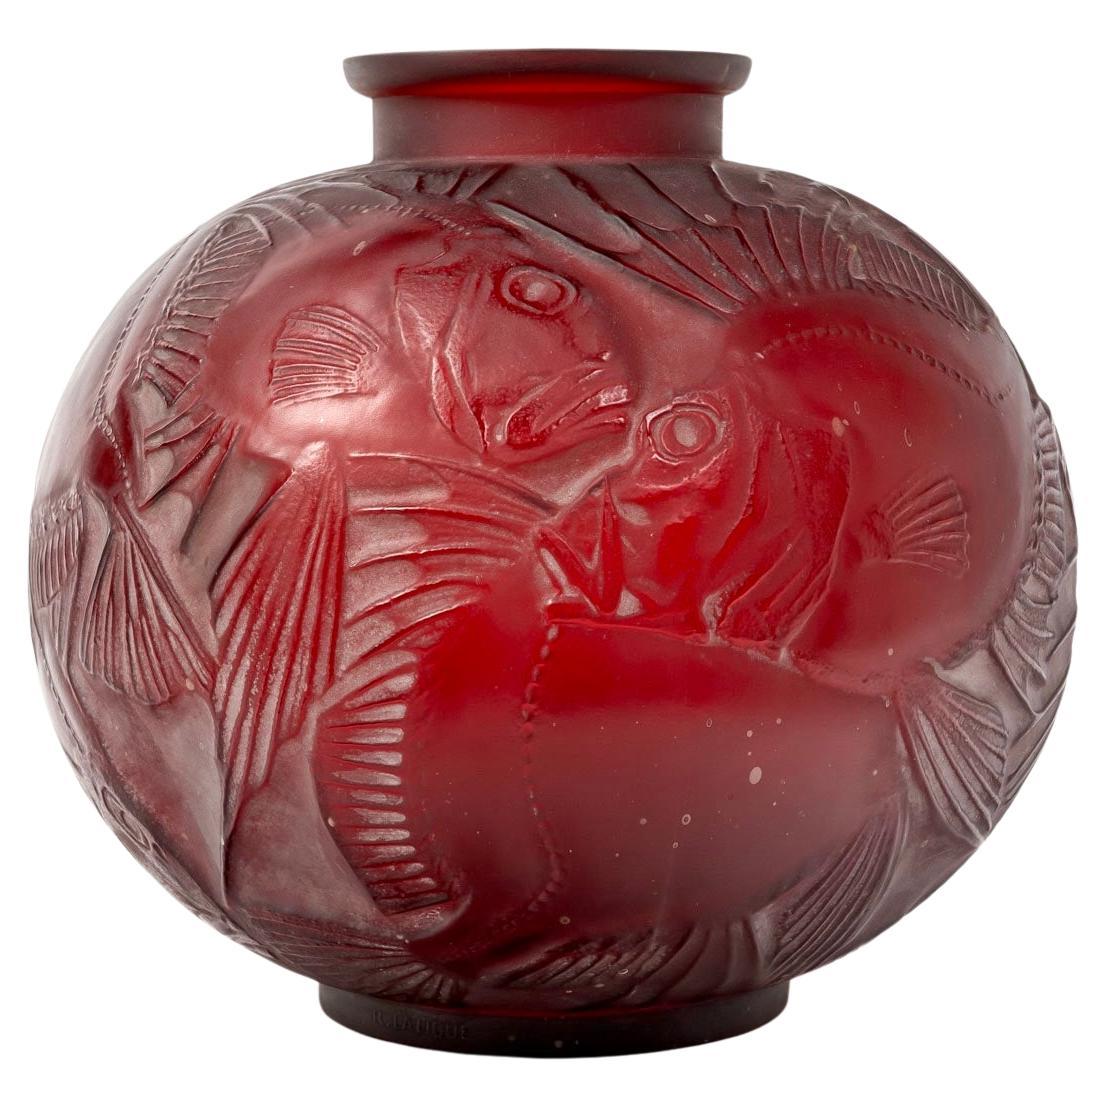 1921 René Lalique Vase Poissons Cased Red Glass White Patina Fishes For Sale